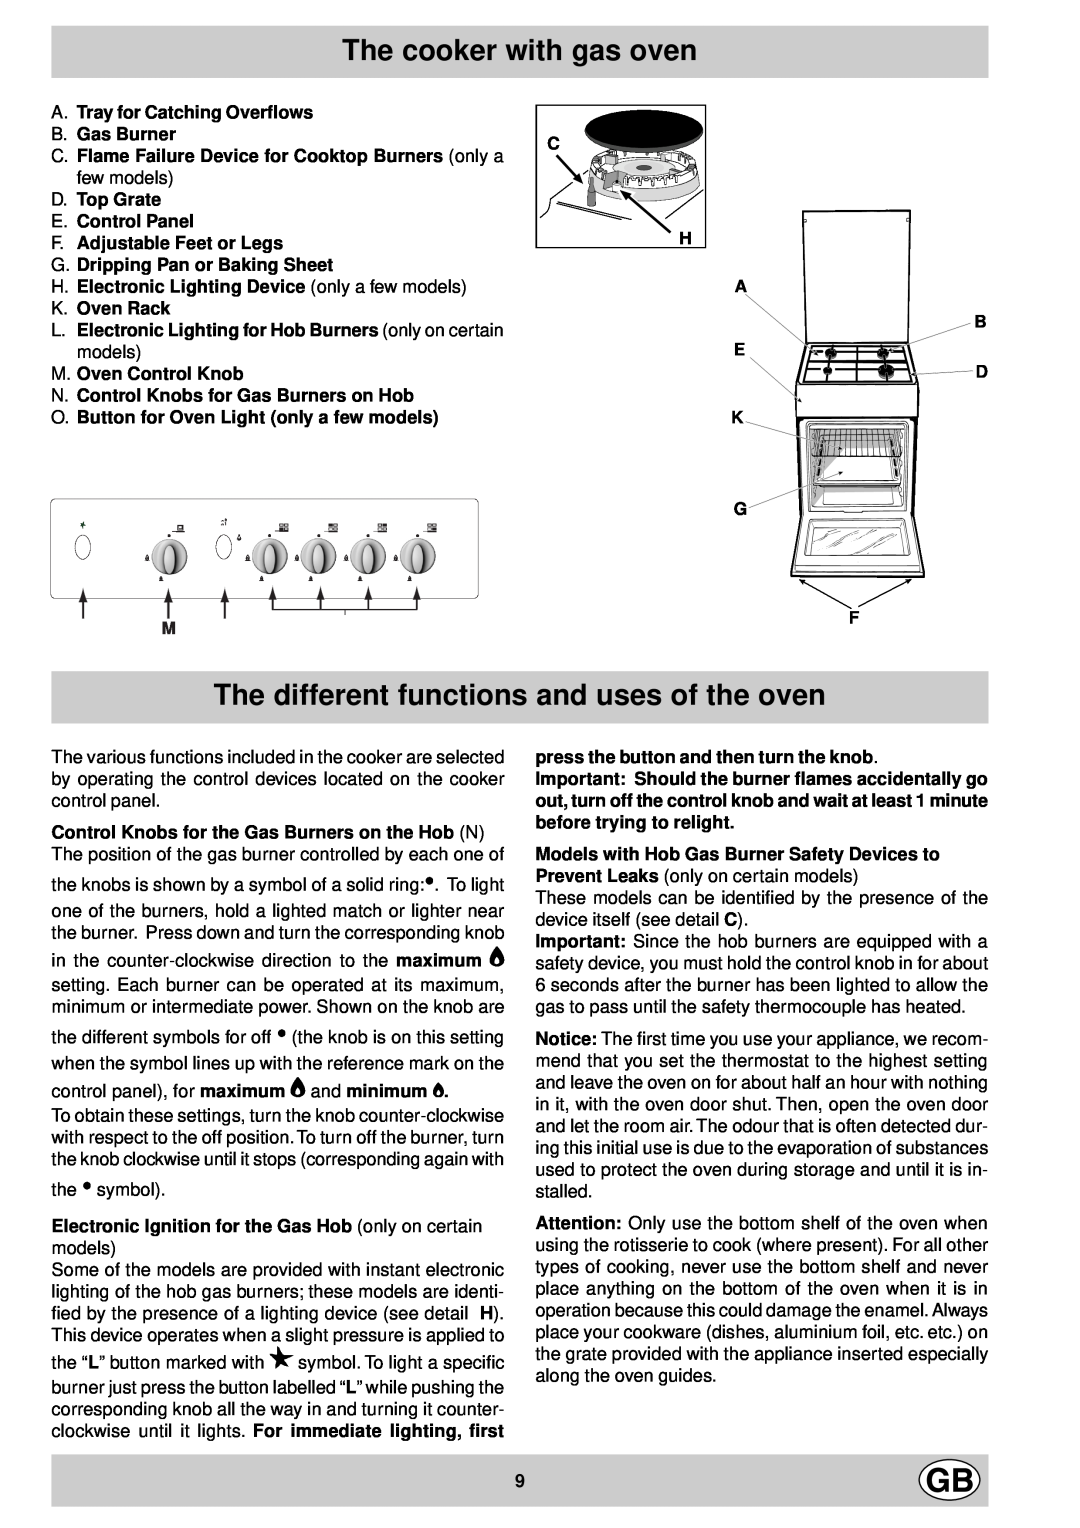 Indesit K1G20/R The cooker with gas oven, The different functions and uses of the oven, G. Dripping Pan or Baking Sheet 